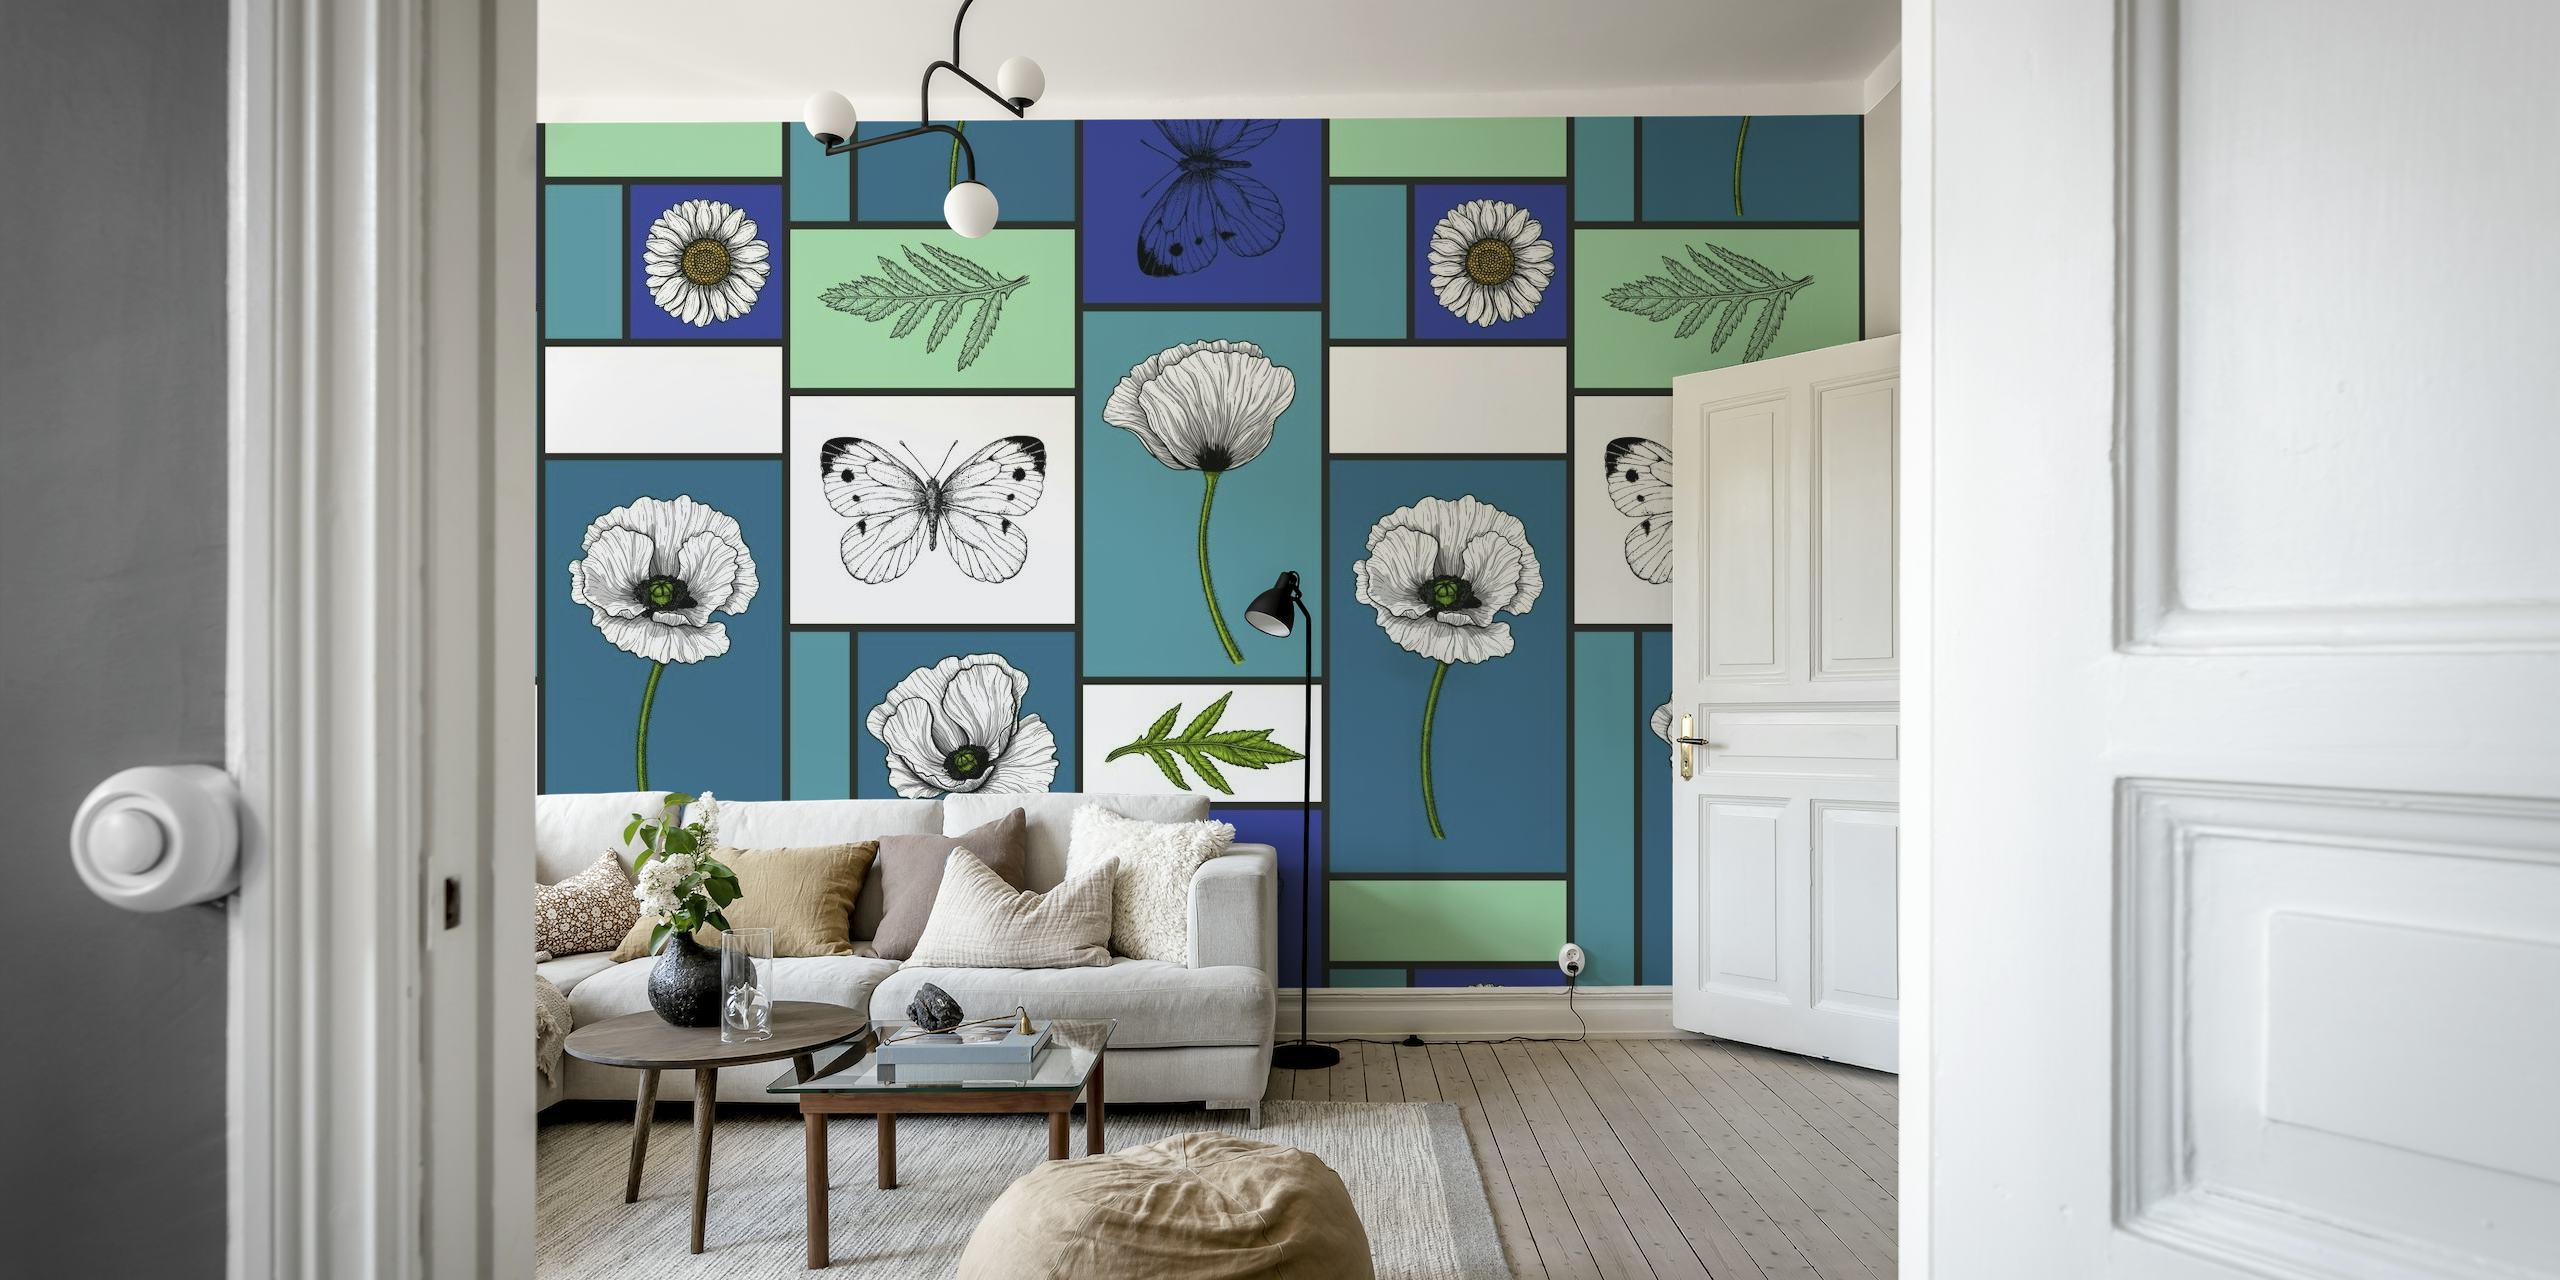 Colorful wall mural of poppies, daisies, and butterflies in a geometric pattern